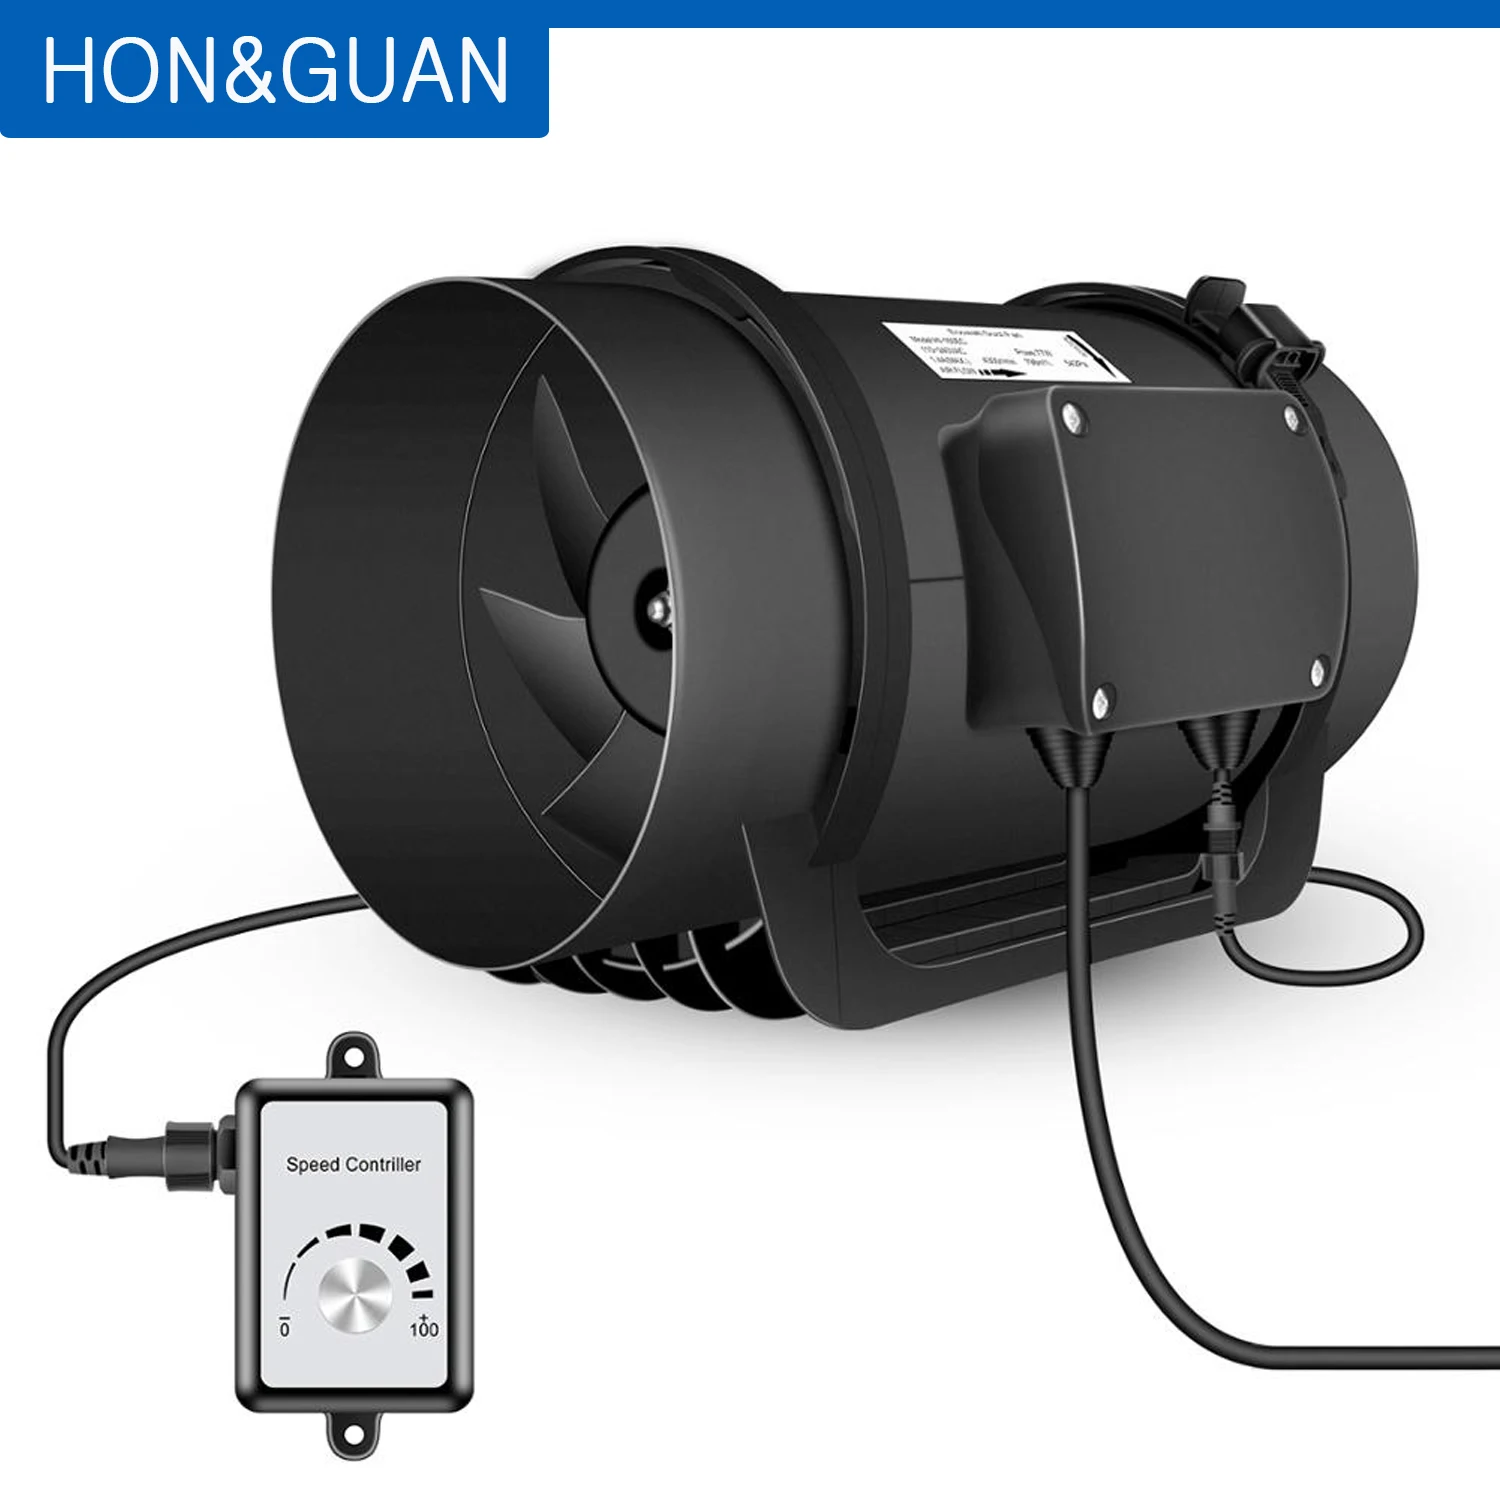 Hon&Guan 6 Inch Inline Duct Fan 0-10V PWM Variable Speed Controller Air Extractor for Bathroom Exhaust Ventilator HI-150EC Motor